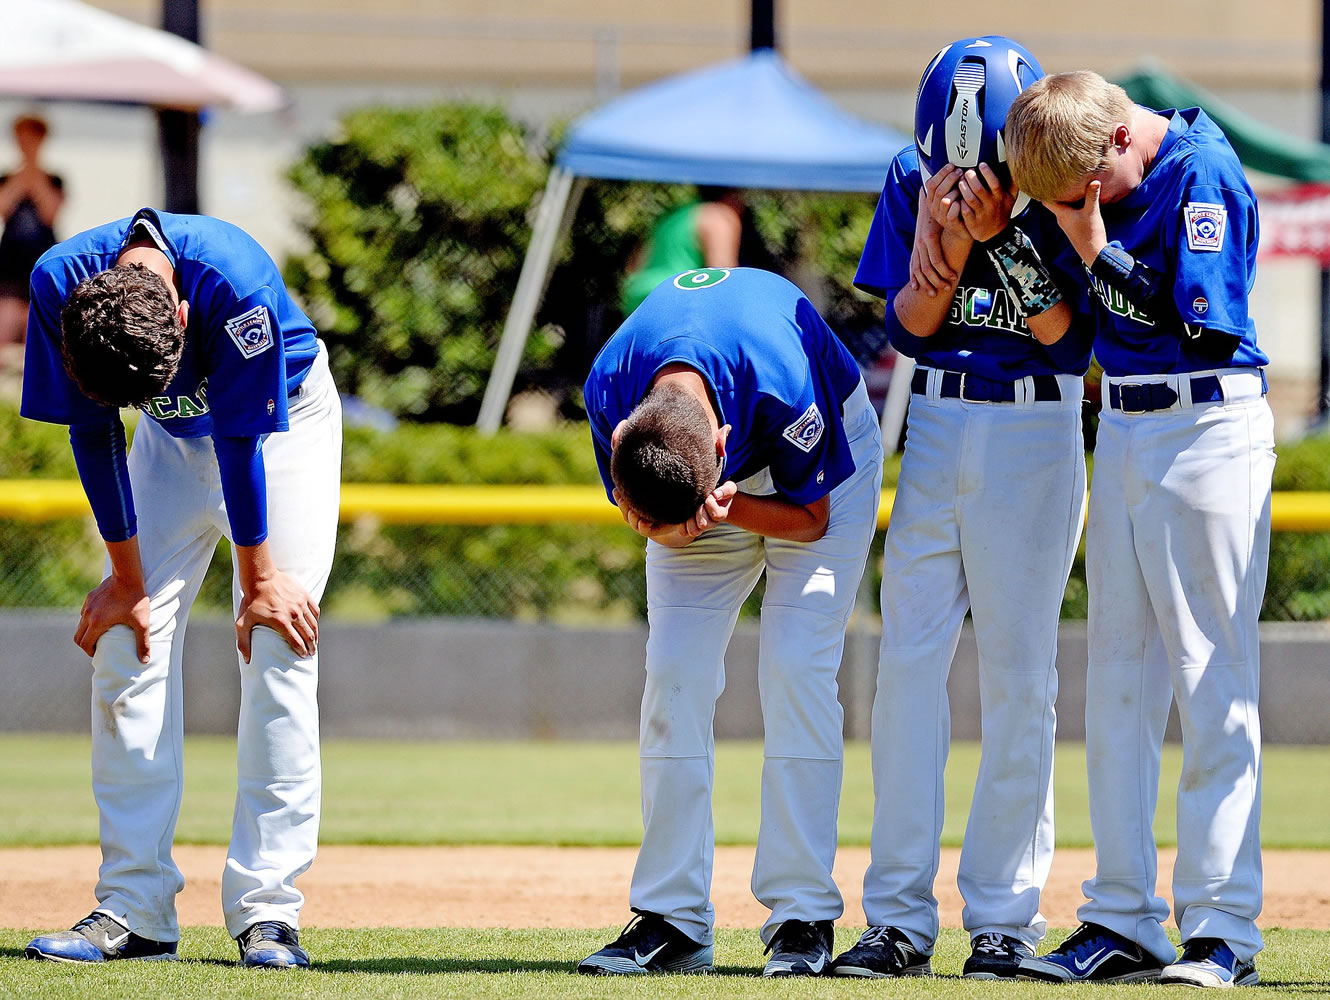 Cascade Little League players Mathew Chudek, Lucas Horowitz, Jake Bowen and Ben Jones show their disappointment after losing to Idaho 8-7 on an a aiding a player call to end the game in the bottom of the 6th inning Friday August 14, 2015 at the Little League Western Regionals in San Bernardino, Calif.